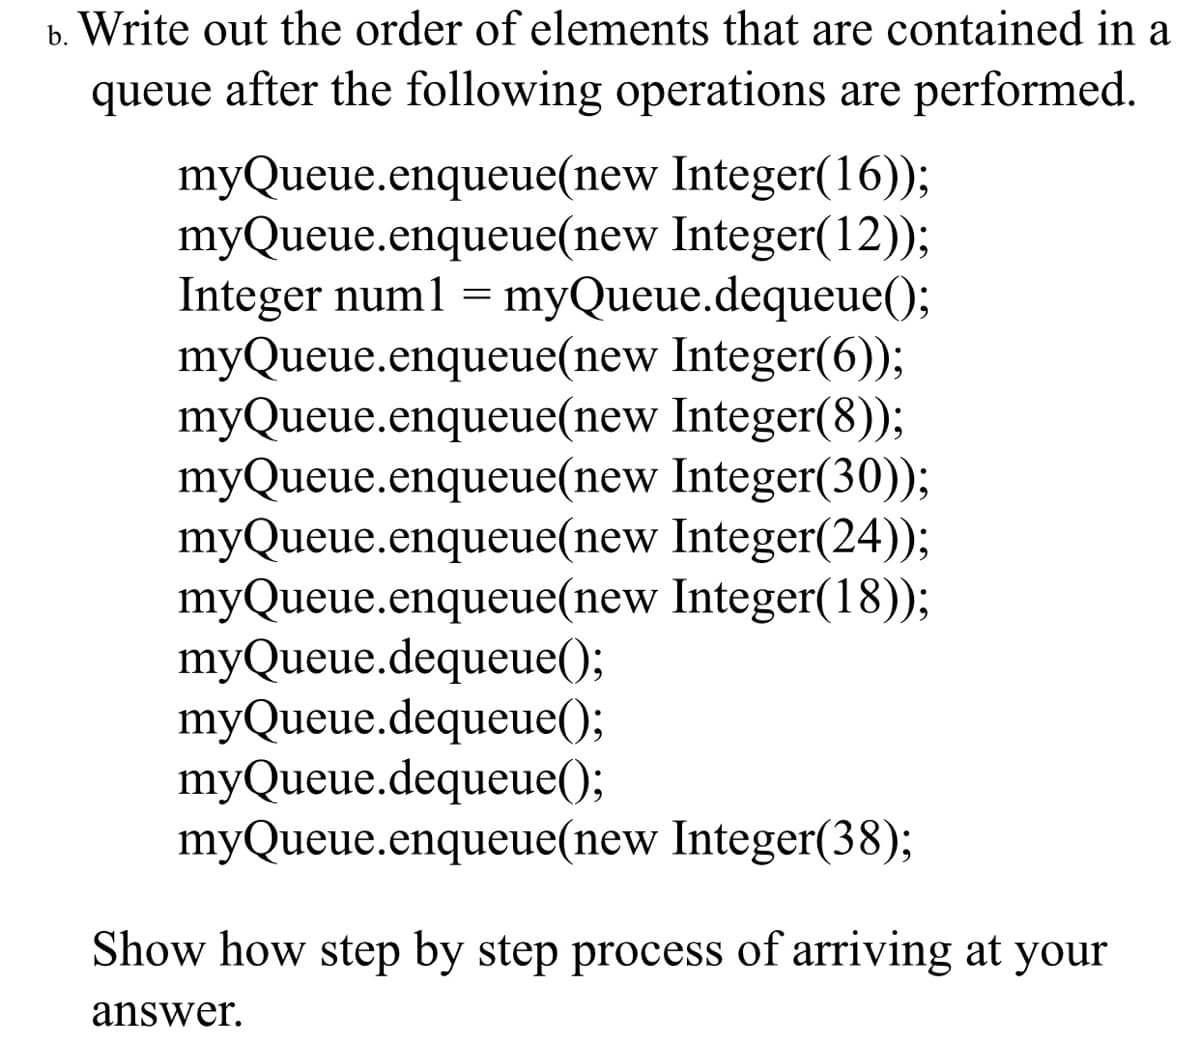 b. Write out the order of elements that are contained in a
queue after the following operations are performed.
myQueue.enqueue(new Integer(16));
myQueue.enqueue(new Integer(12));
Integer num1 = myQueue.dequeue();
myQueue.enqueue(new Integer(6));
myQueue.enqueue(new Integer(8));
myQueue.enqueue(new Integer(30));
myQueue.enqueue(new Integer(24));
myQueue.enqueue(new Integer(18));
myQueue.dequeue();
myQueue.dequeue();
myQueue.dequeue();
myQueue.enqueue(new Integer(38);
Show how step by step process of arriving at your
answer.
